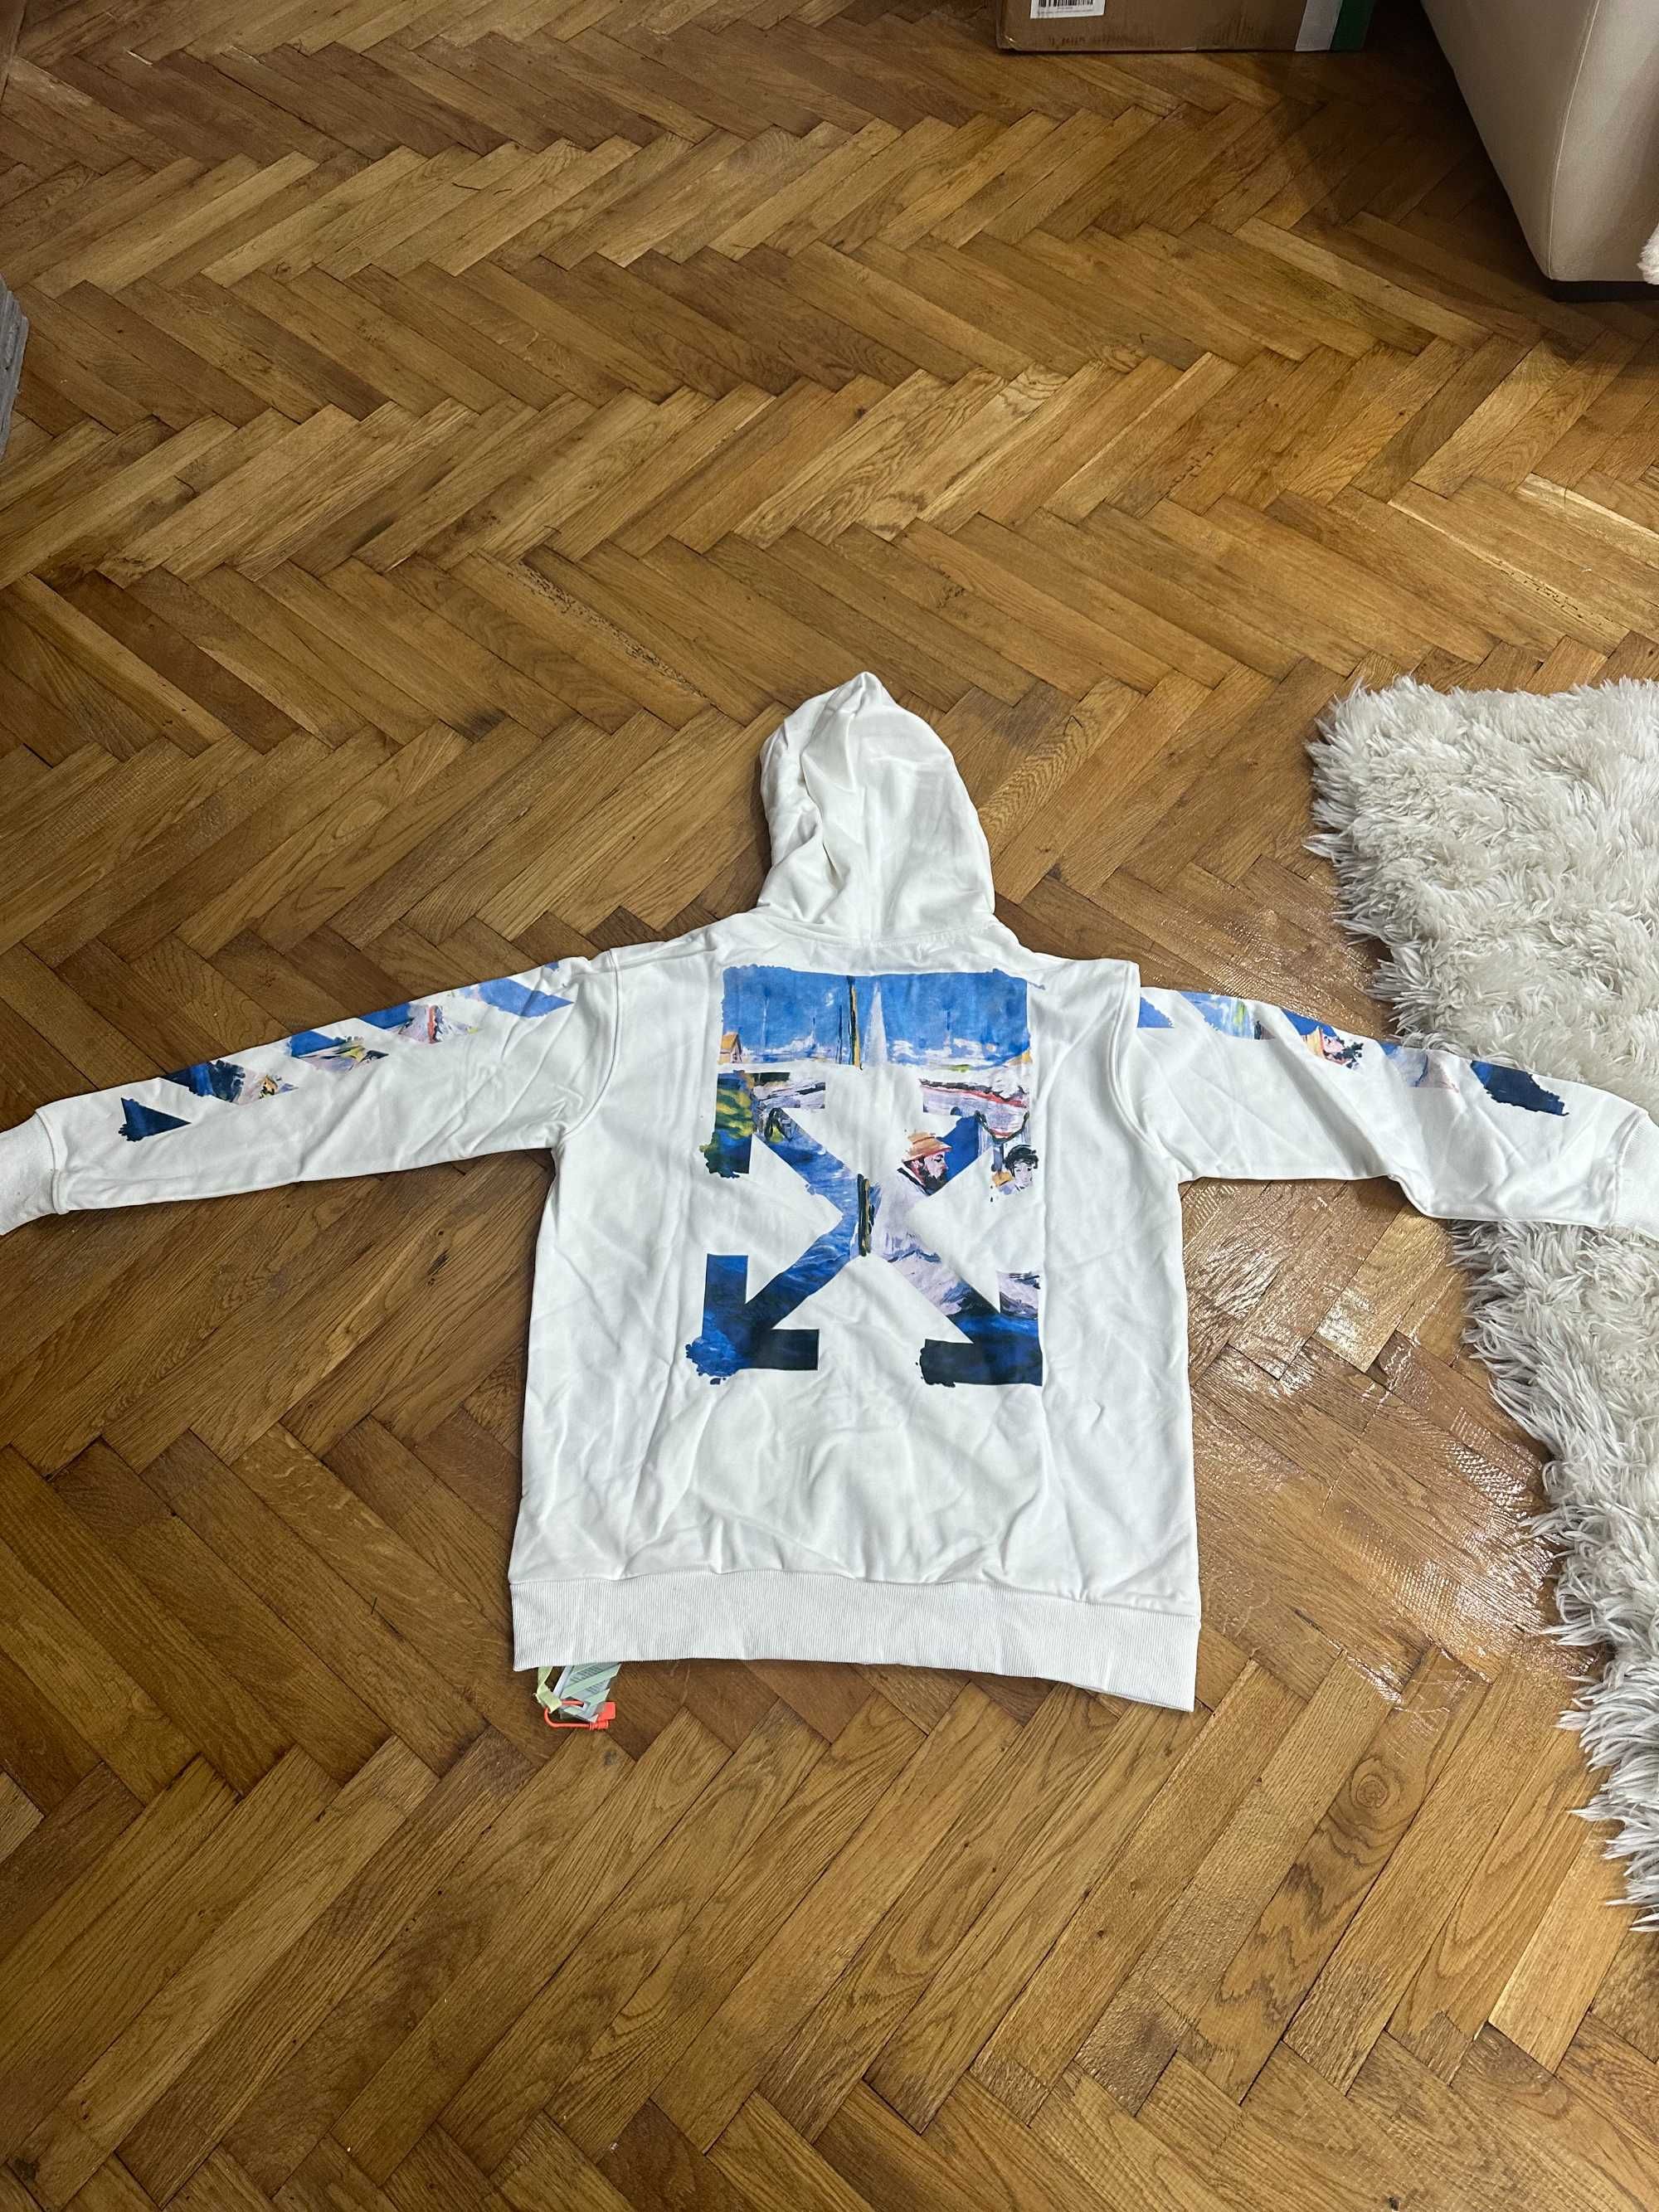 OFF-WHITE Edouard Manet Floating Studio Arrows Zip Up Hoodie Size M, L